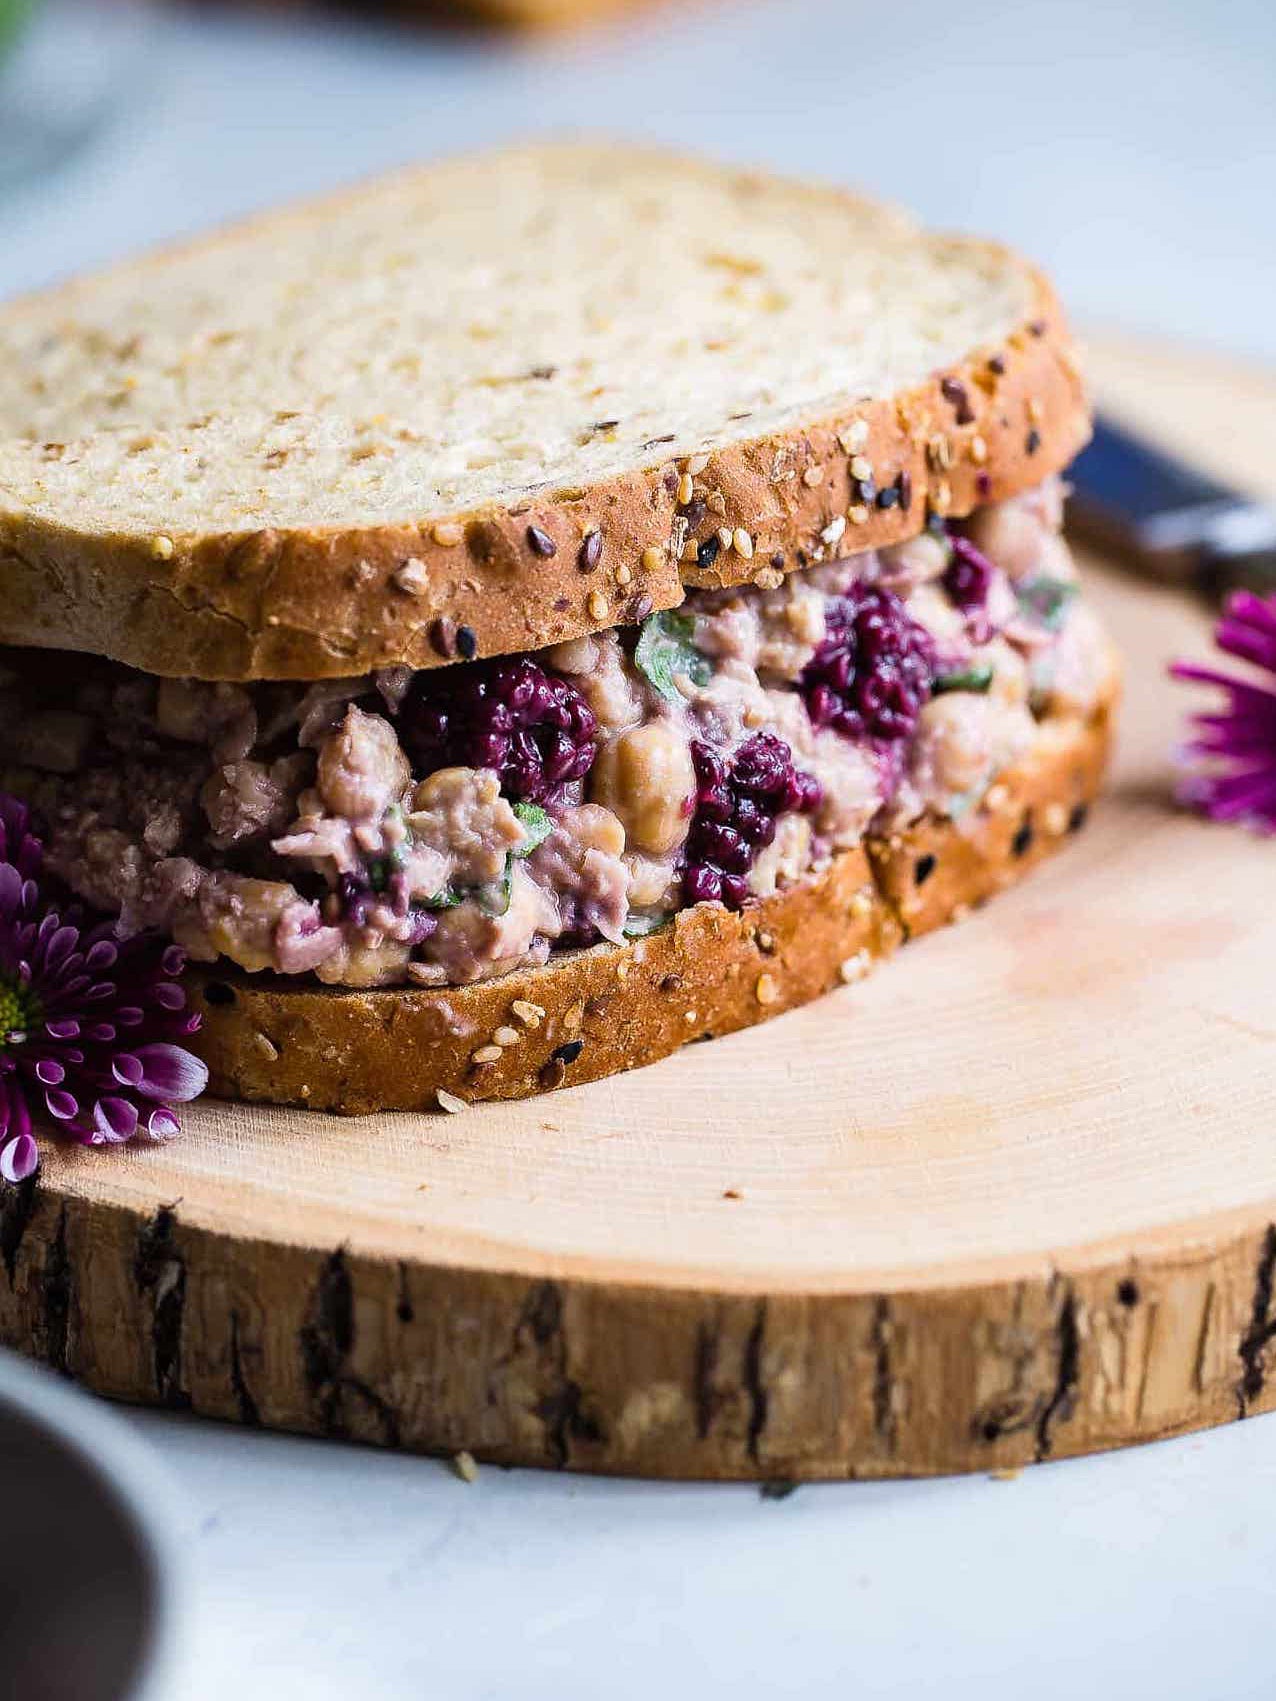 wheat brad with purple chickpea salad in between slices